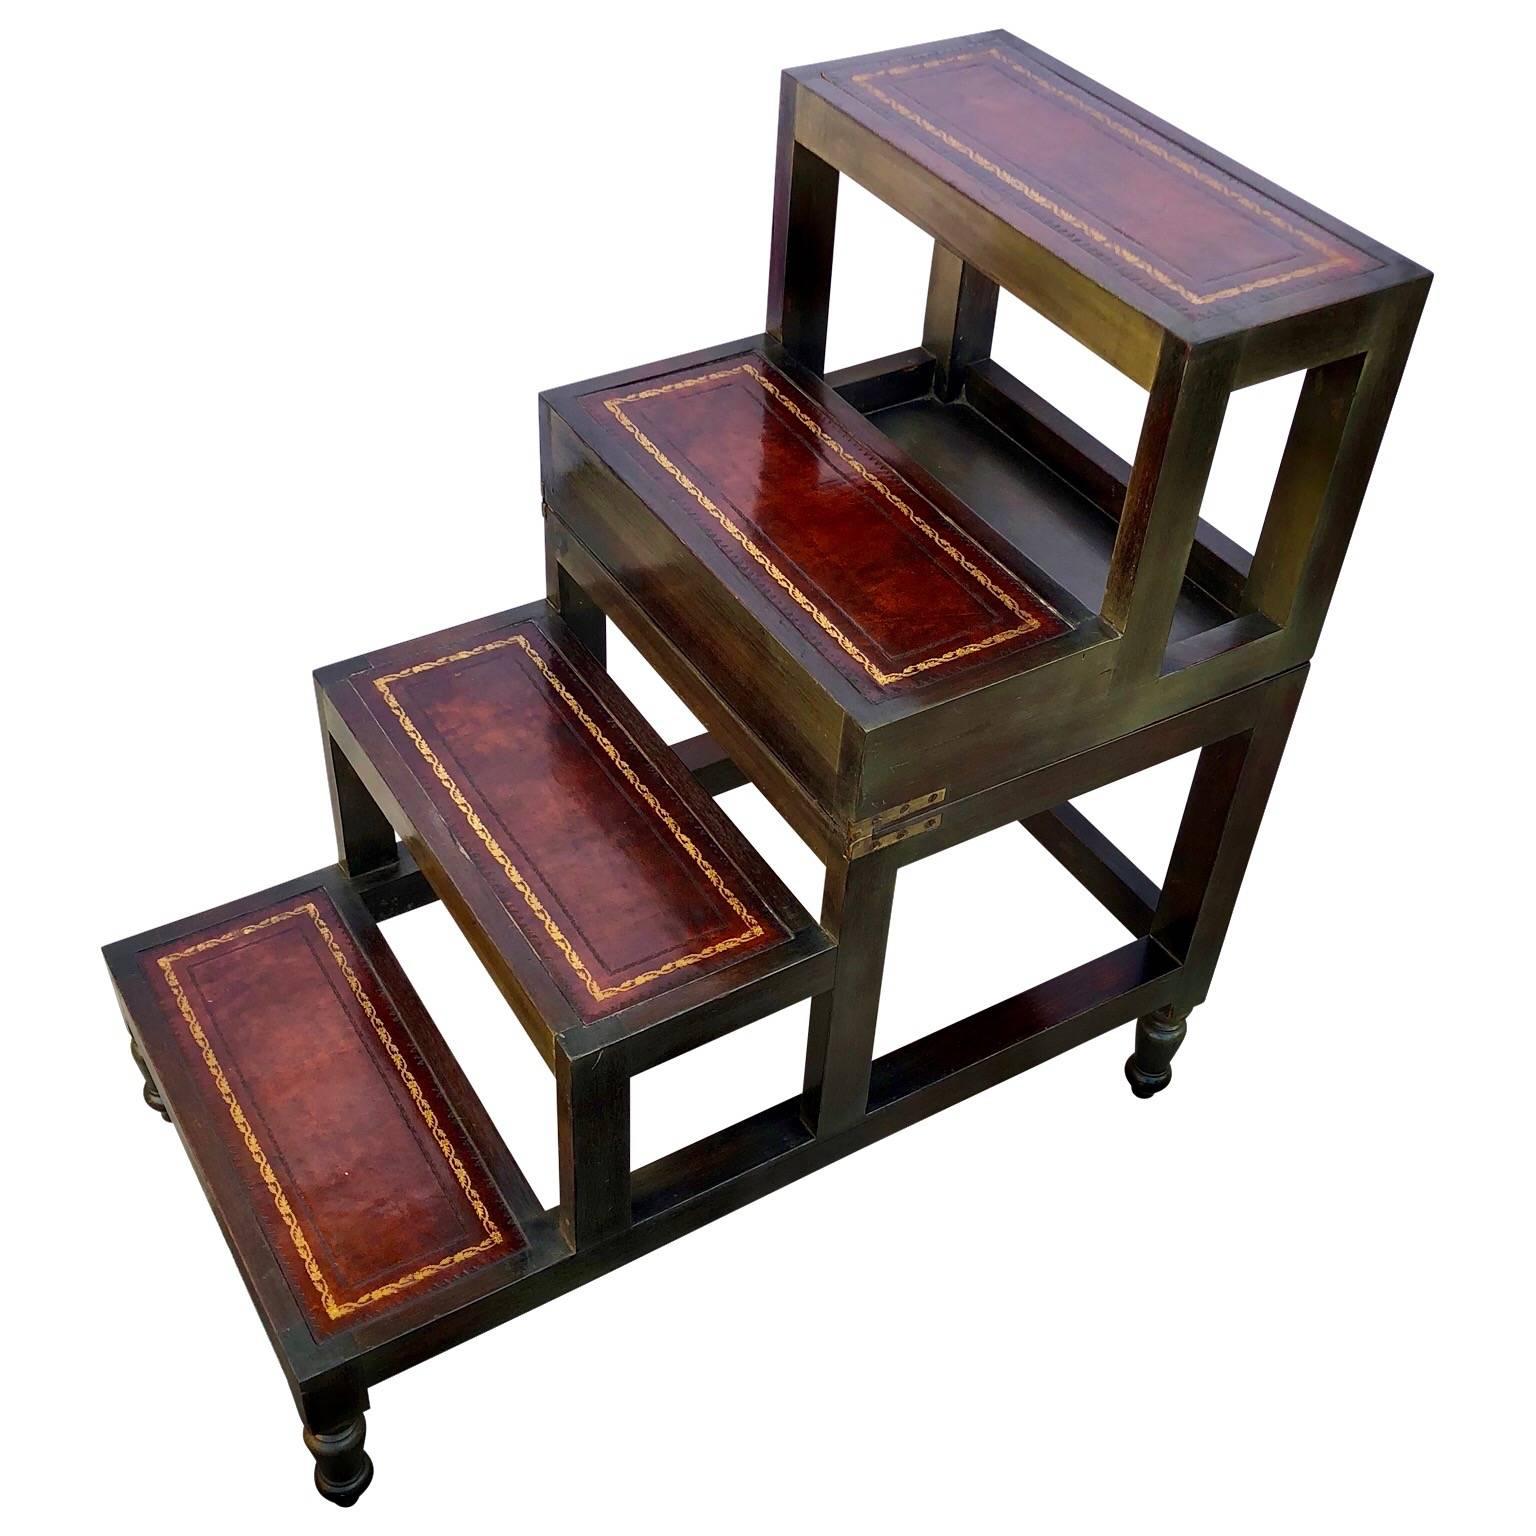 1930's library steps and or side table with decorative gilt incised leather top and leathered steps

The steps measures 27.5 in height when it is opened to steps.
 